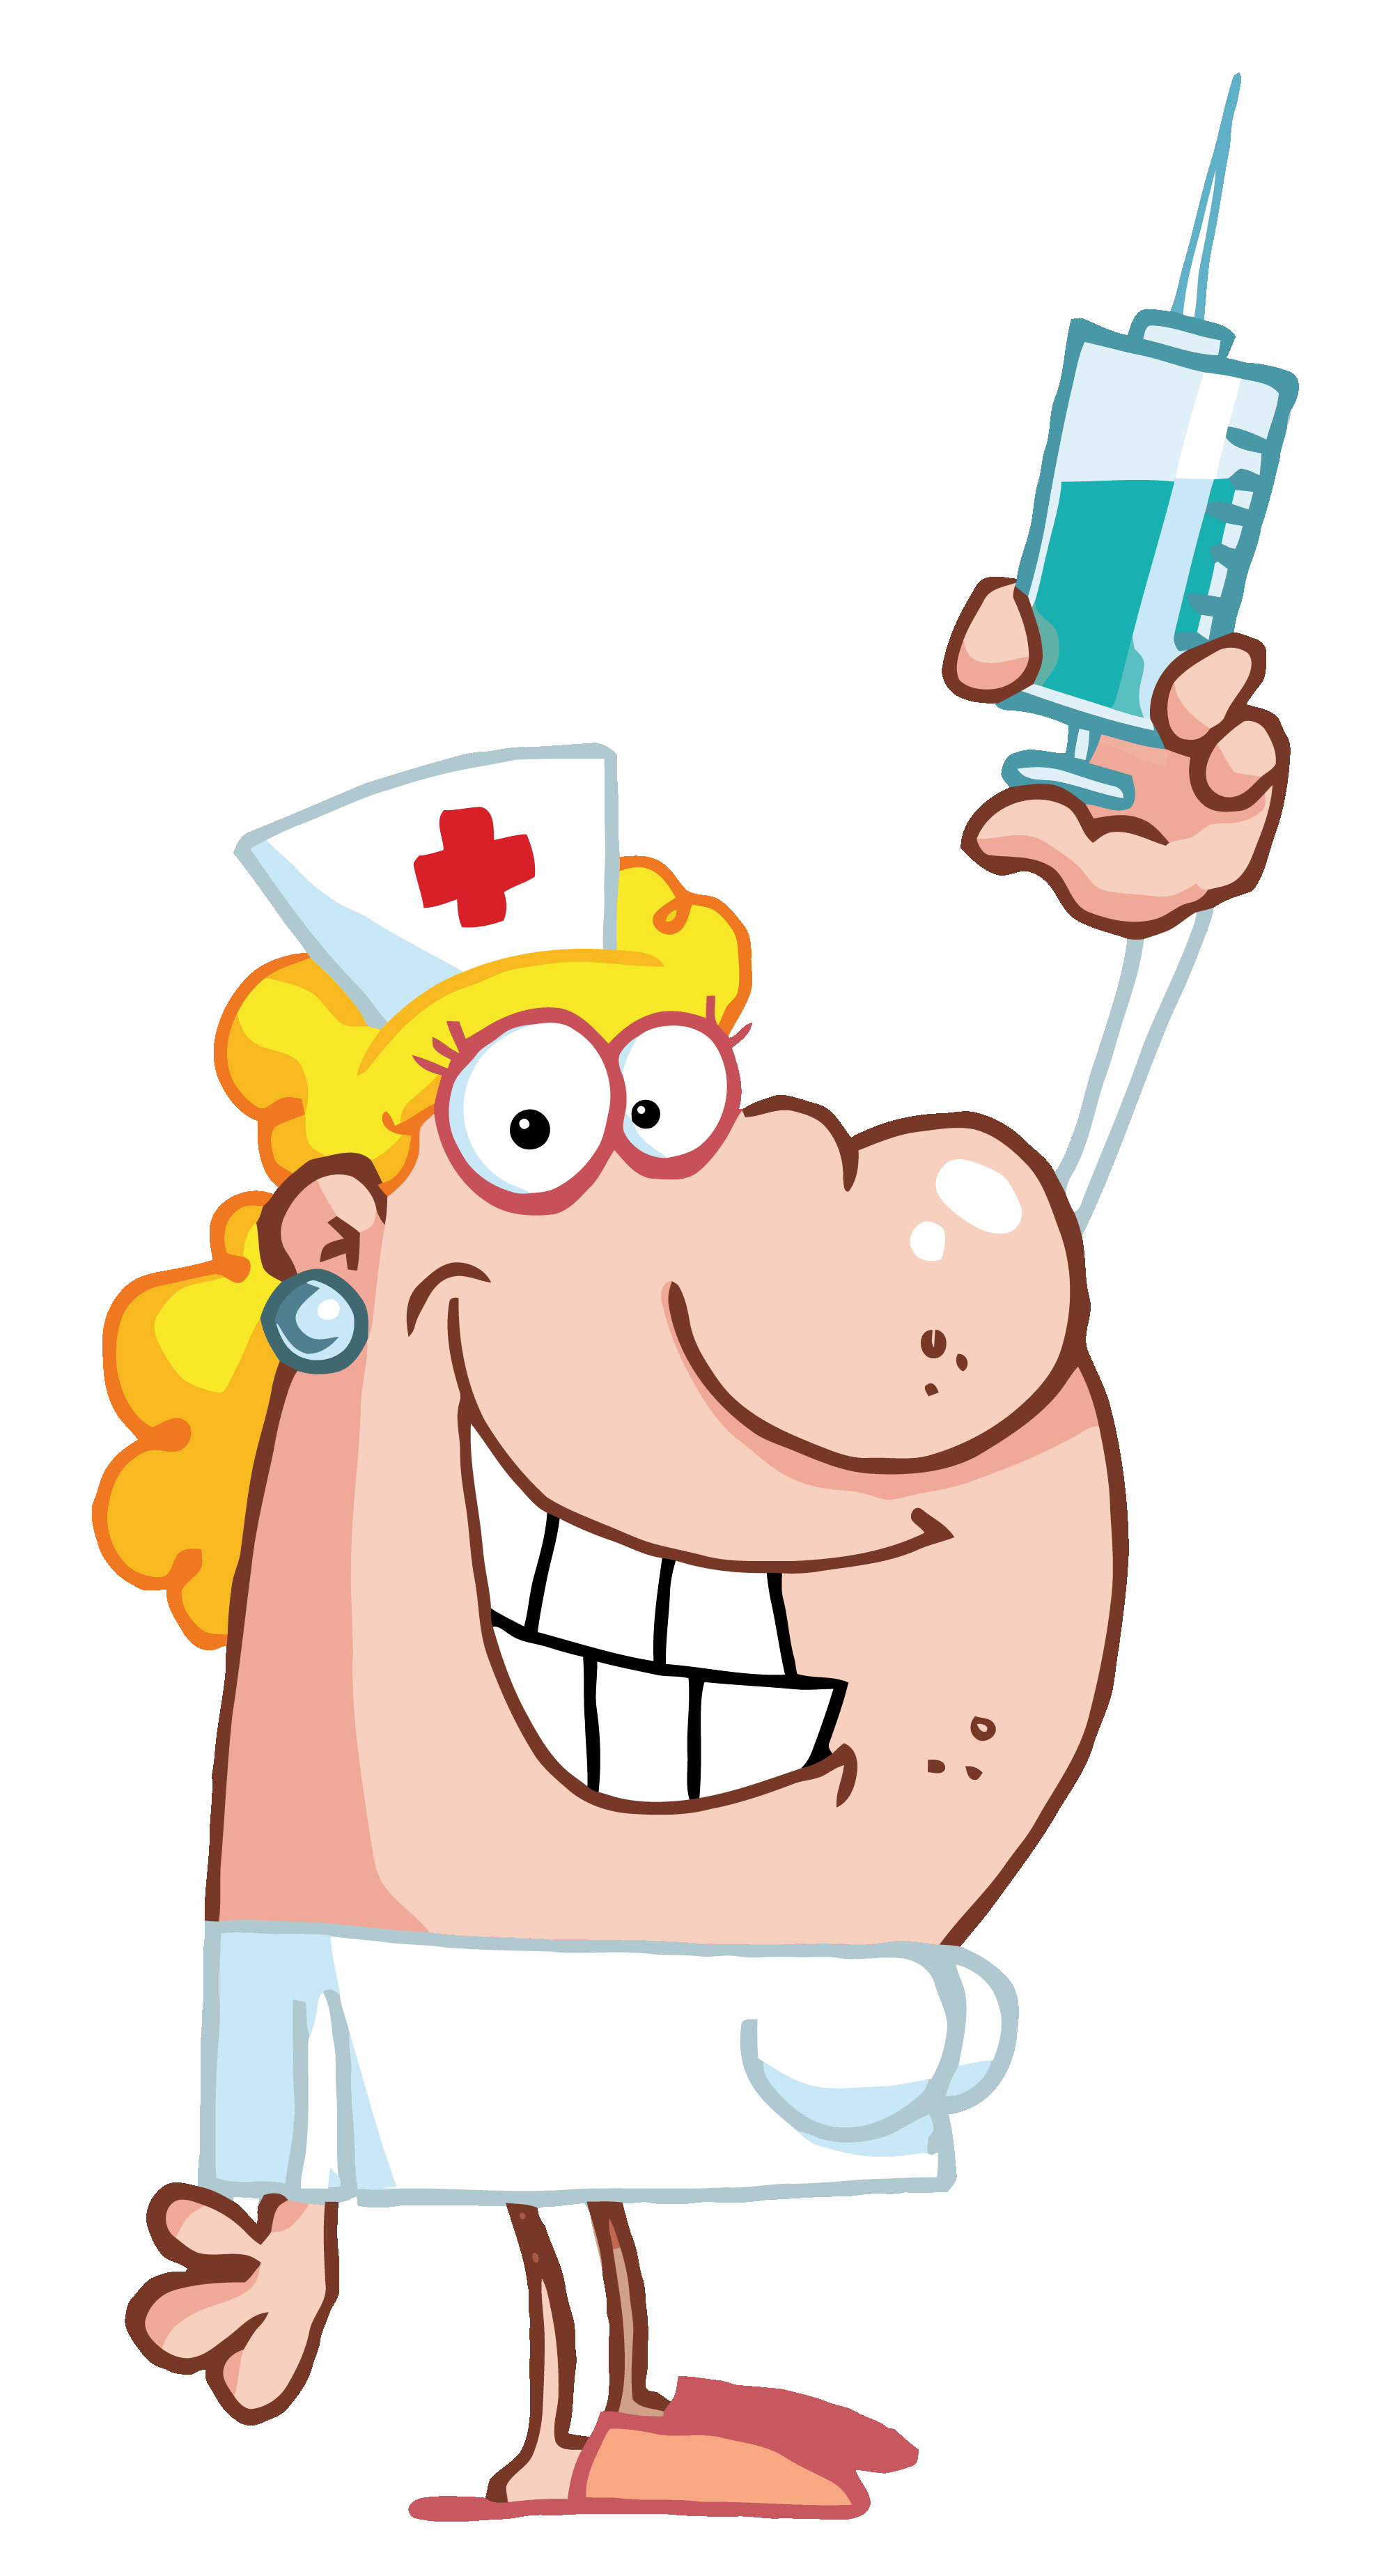 clipart doctor study